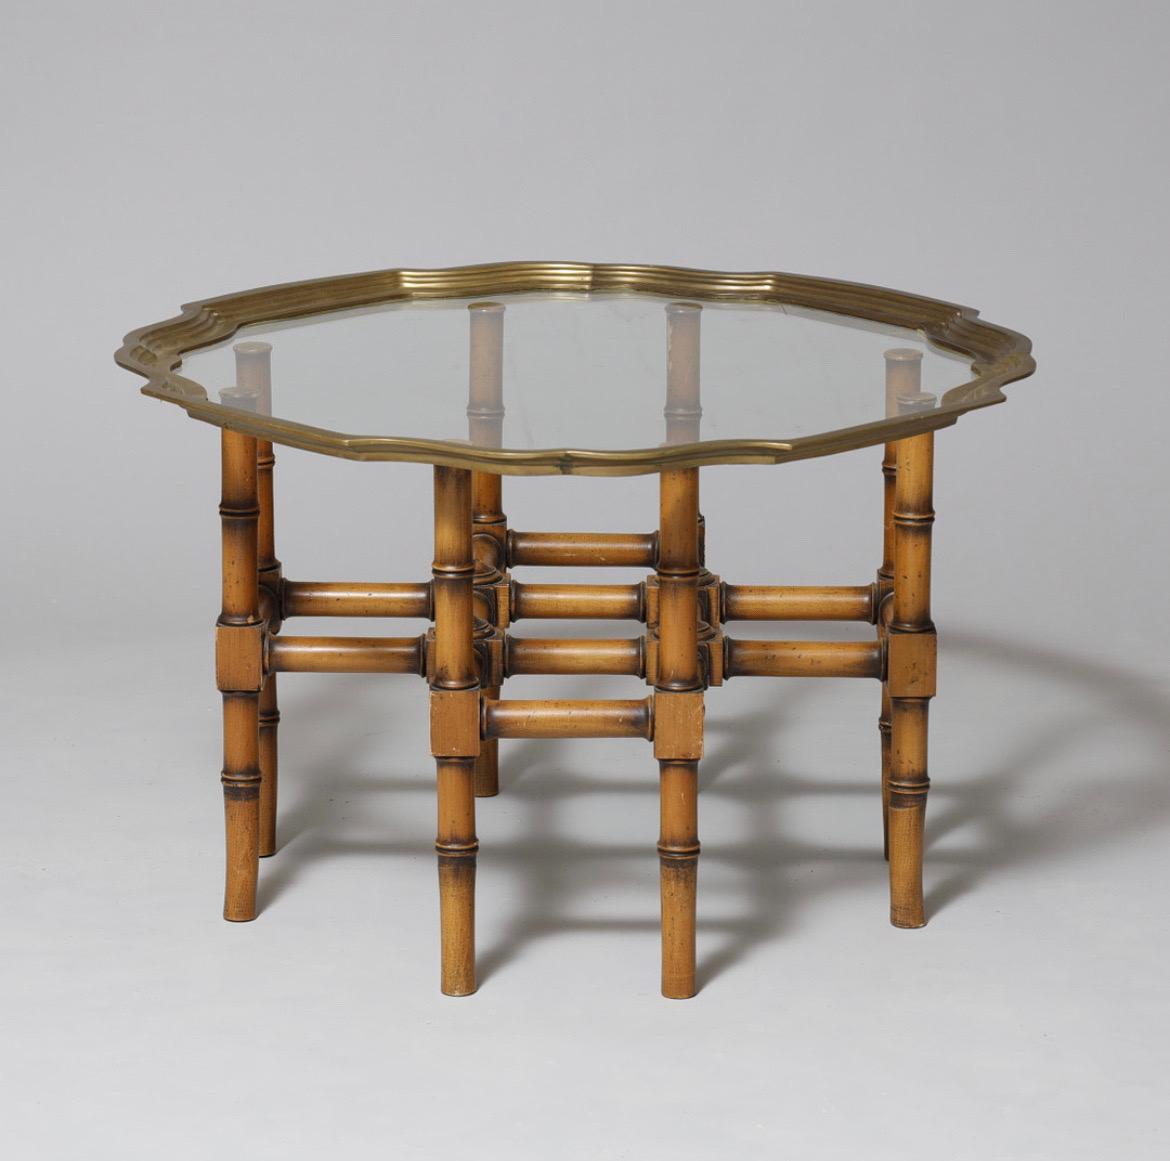 1960s Lysberg, Hansen & Therp Faux Bamboo Coffee Table with Profiled Brass Edge
A stunning mid-century design piece, this stylish coffee table from Danish Lysberg, Hansen & Therp, dates back to the 1960s. 
The table features a frame crafted from